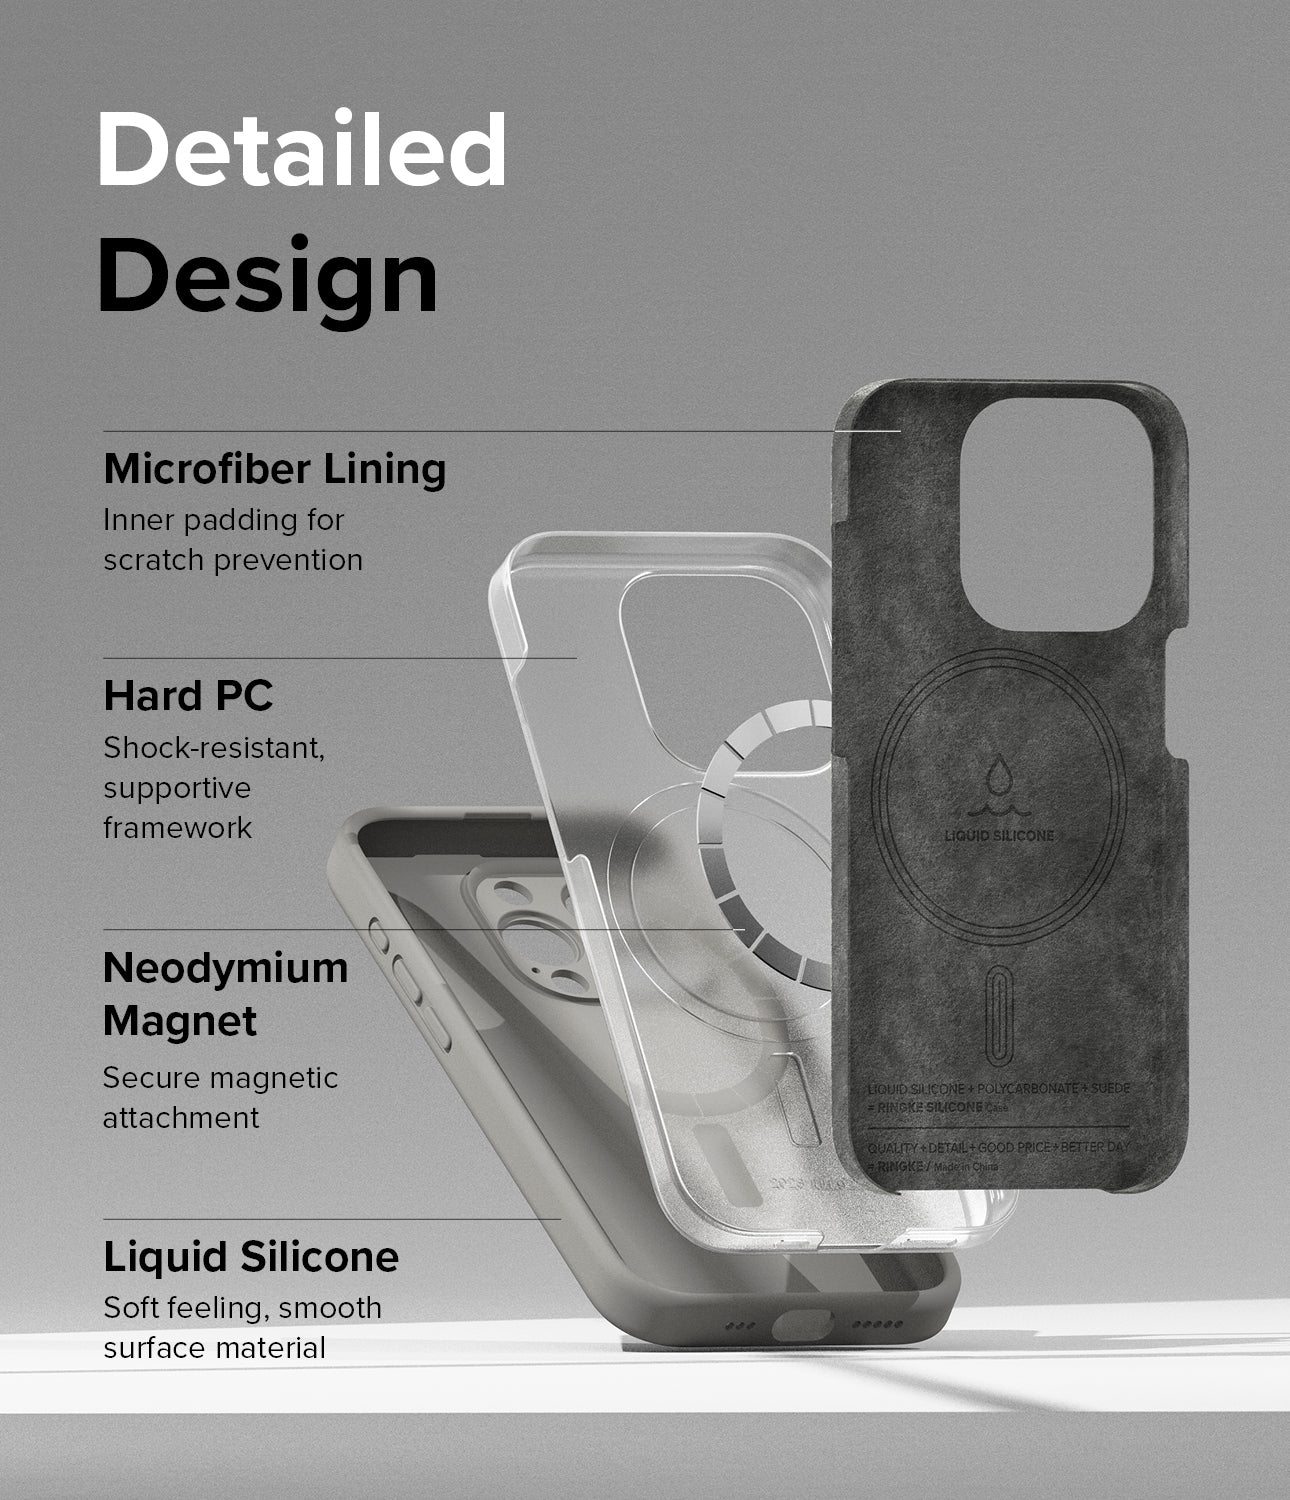 iPhone 15 Pro Case | Silicone Magnetic - Gray - Detailed Design. Innder padding for scratch prevention with Microfiber Lining. Shock-resistant, supportive framework with Hard PC. Secure magnetic attachment with Neodymium Magnet. Soft feeling, smooth surface Liquid Silicone.